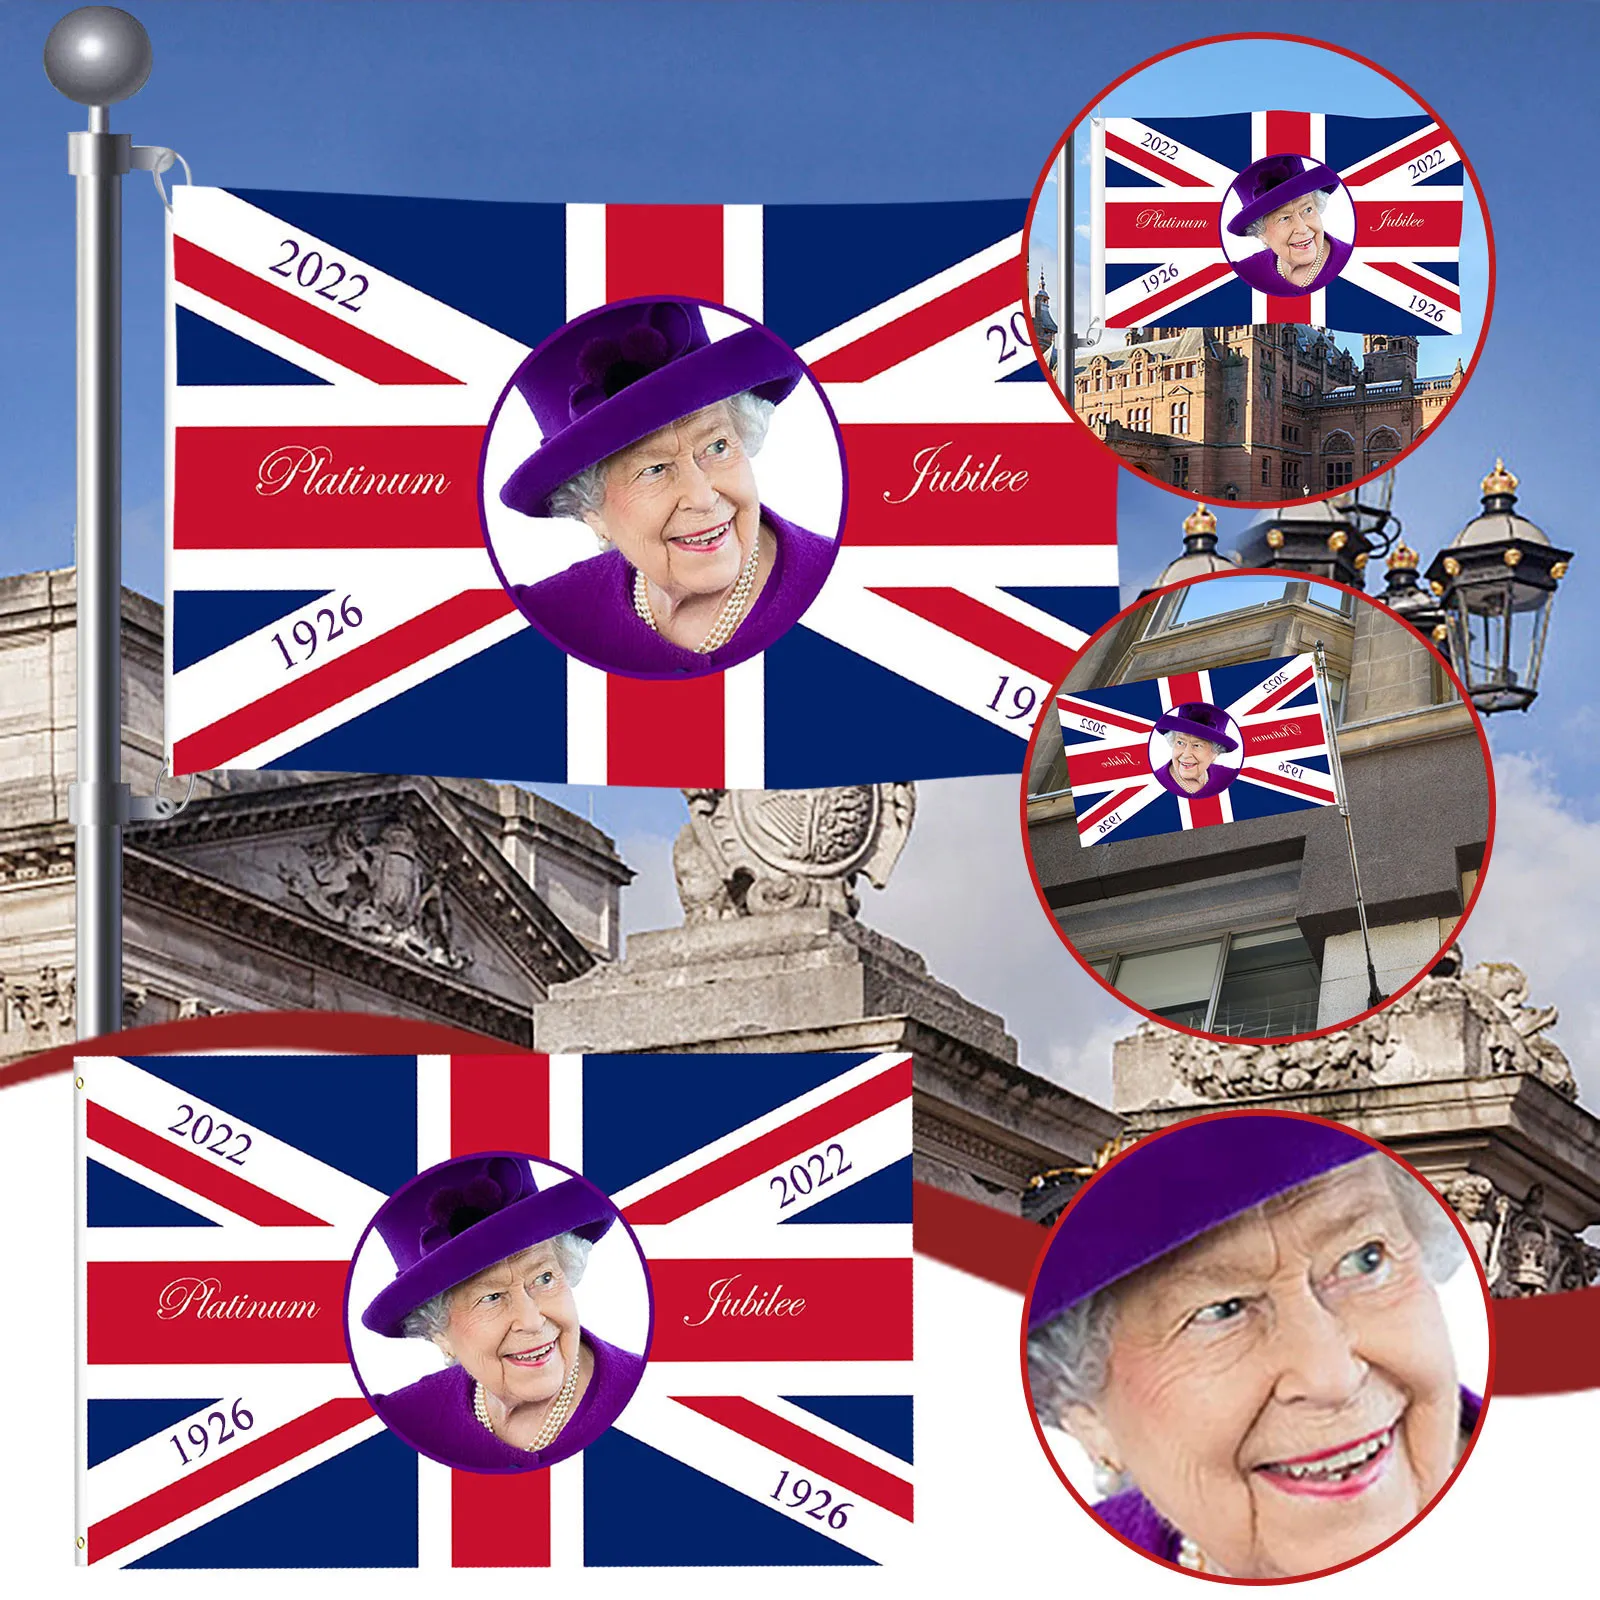 

2022 Queen Elizabeth Platinums Jubilee Flag 90x150cm Quality Polyester Union Jack Flags Featuring Her Majesty The Queen 70th